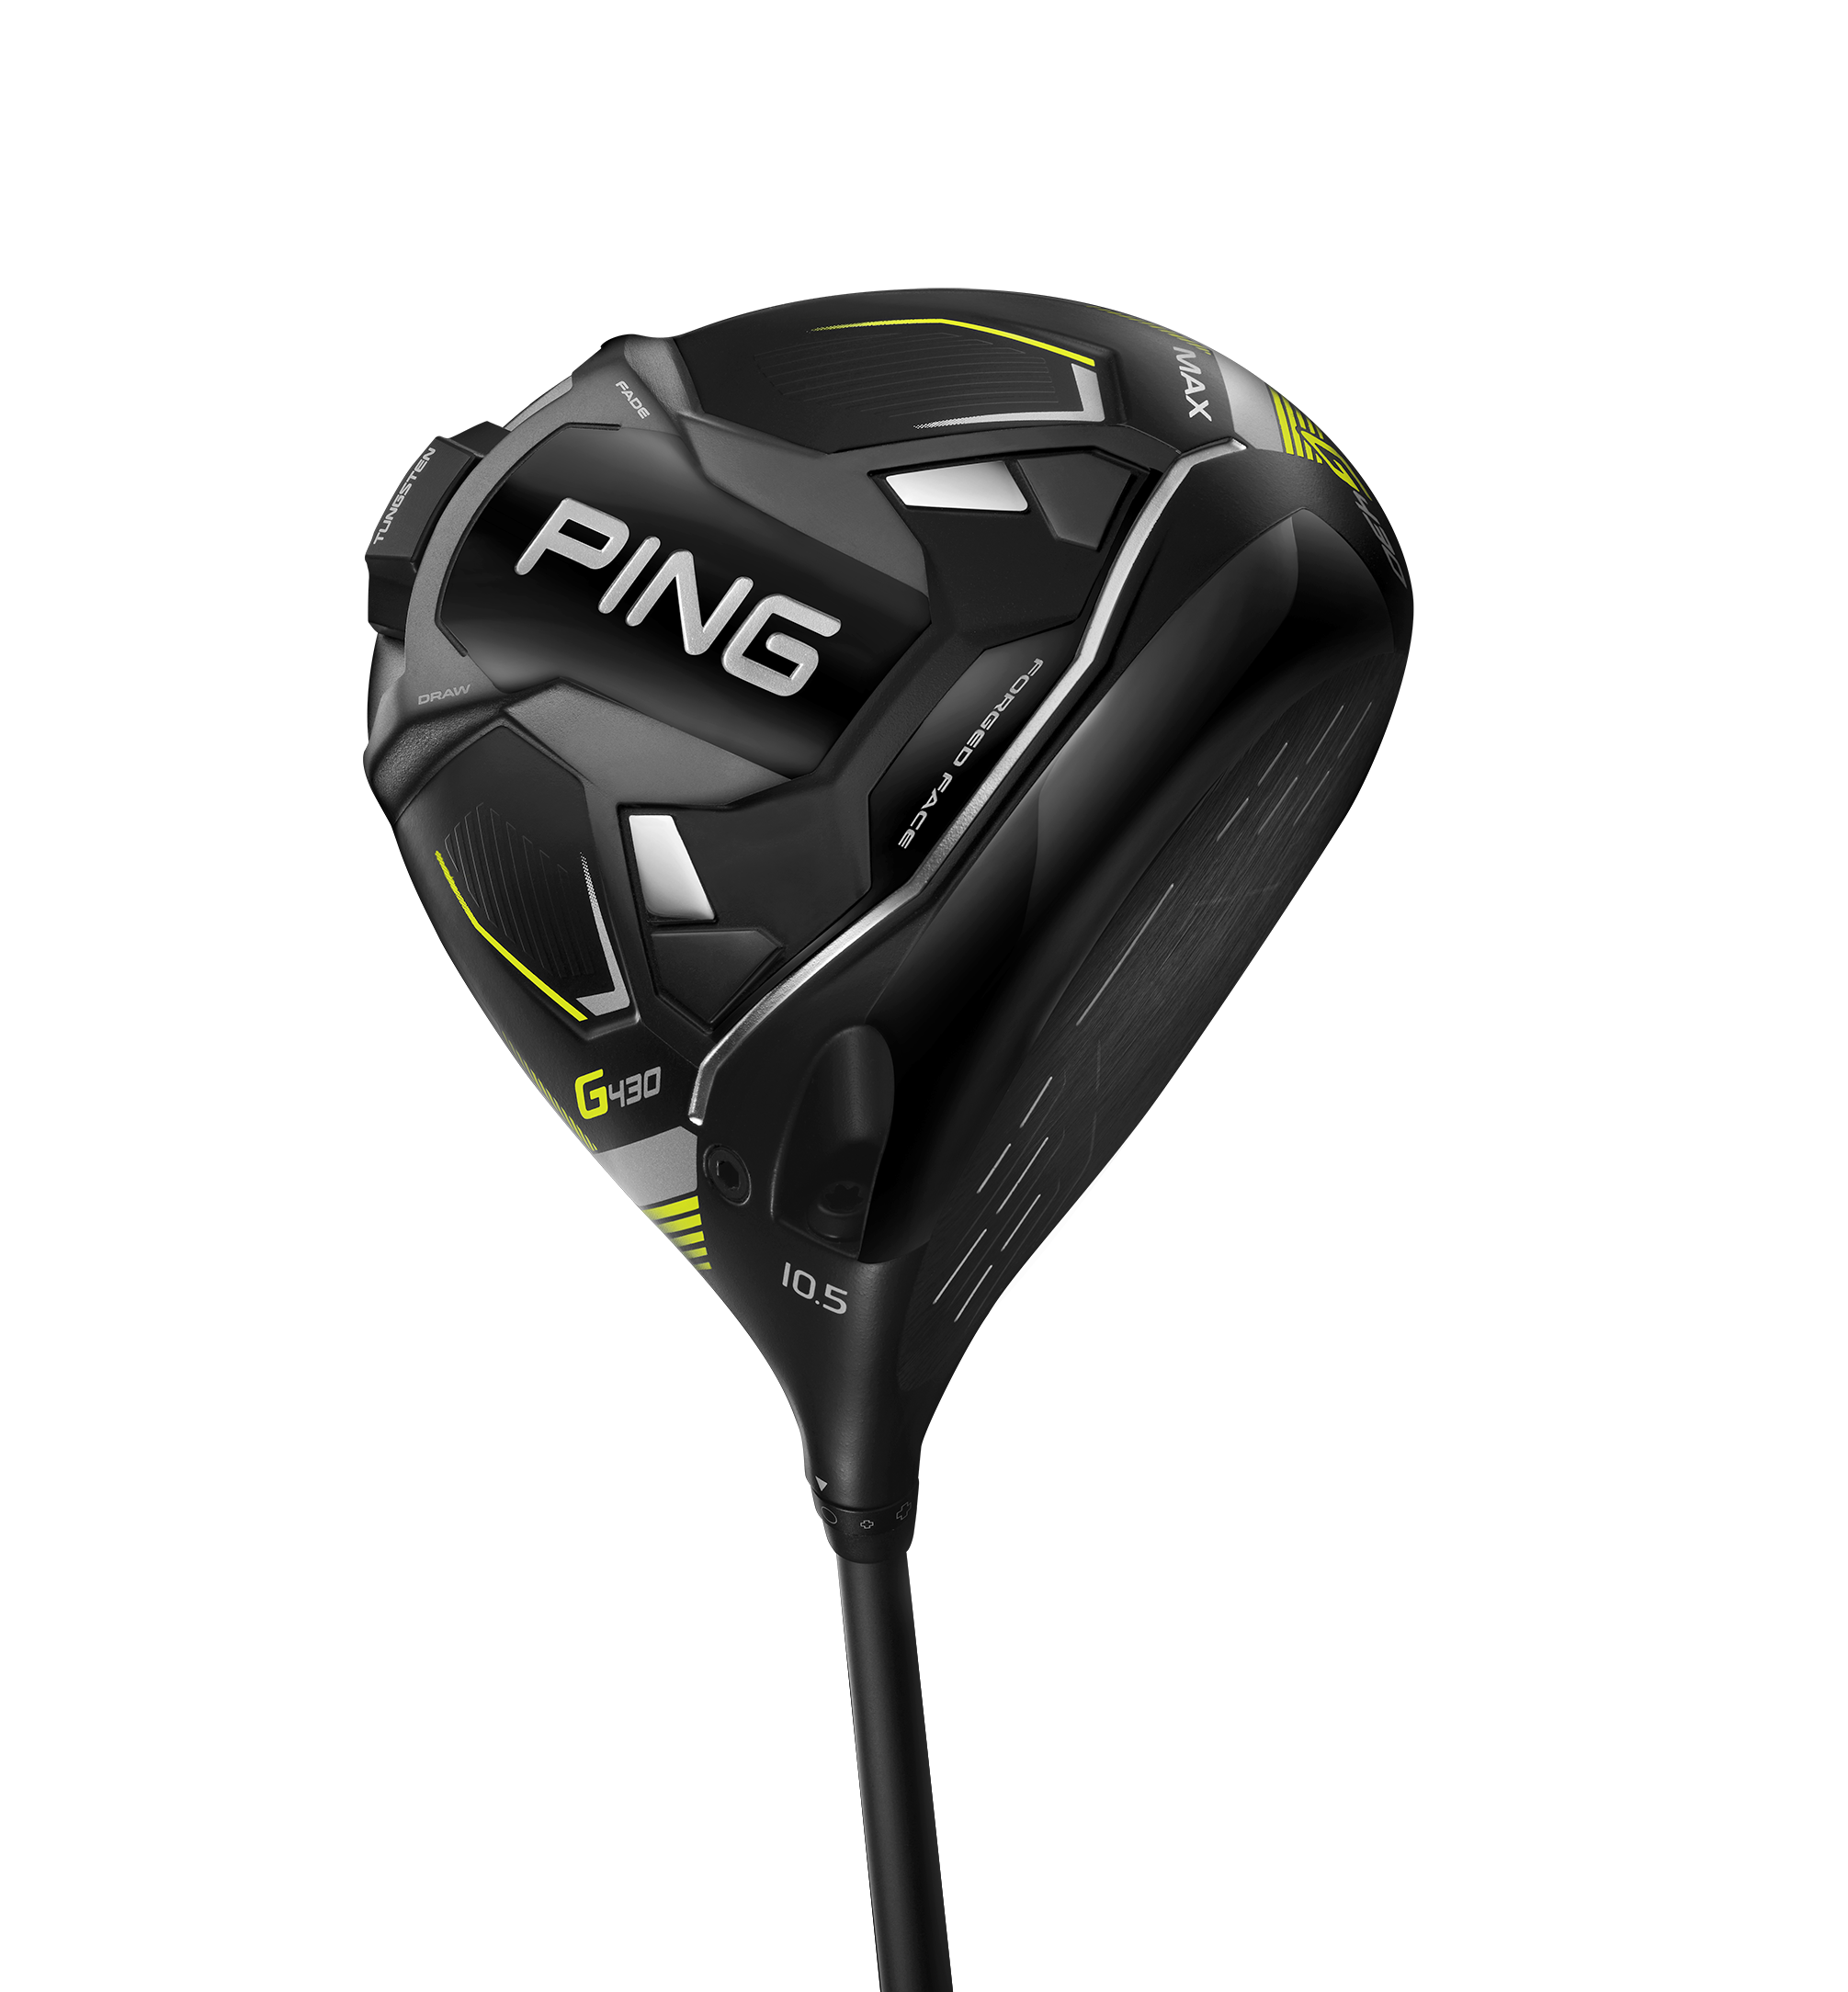 Ping G430 drivers: What you need to know | Golf Equipment: Clubs, Balls,  Bags | GolfDigest.com